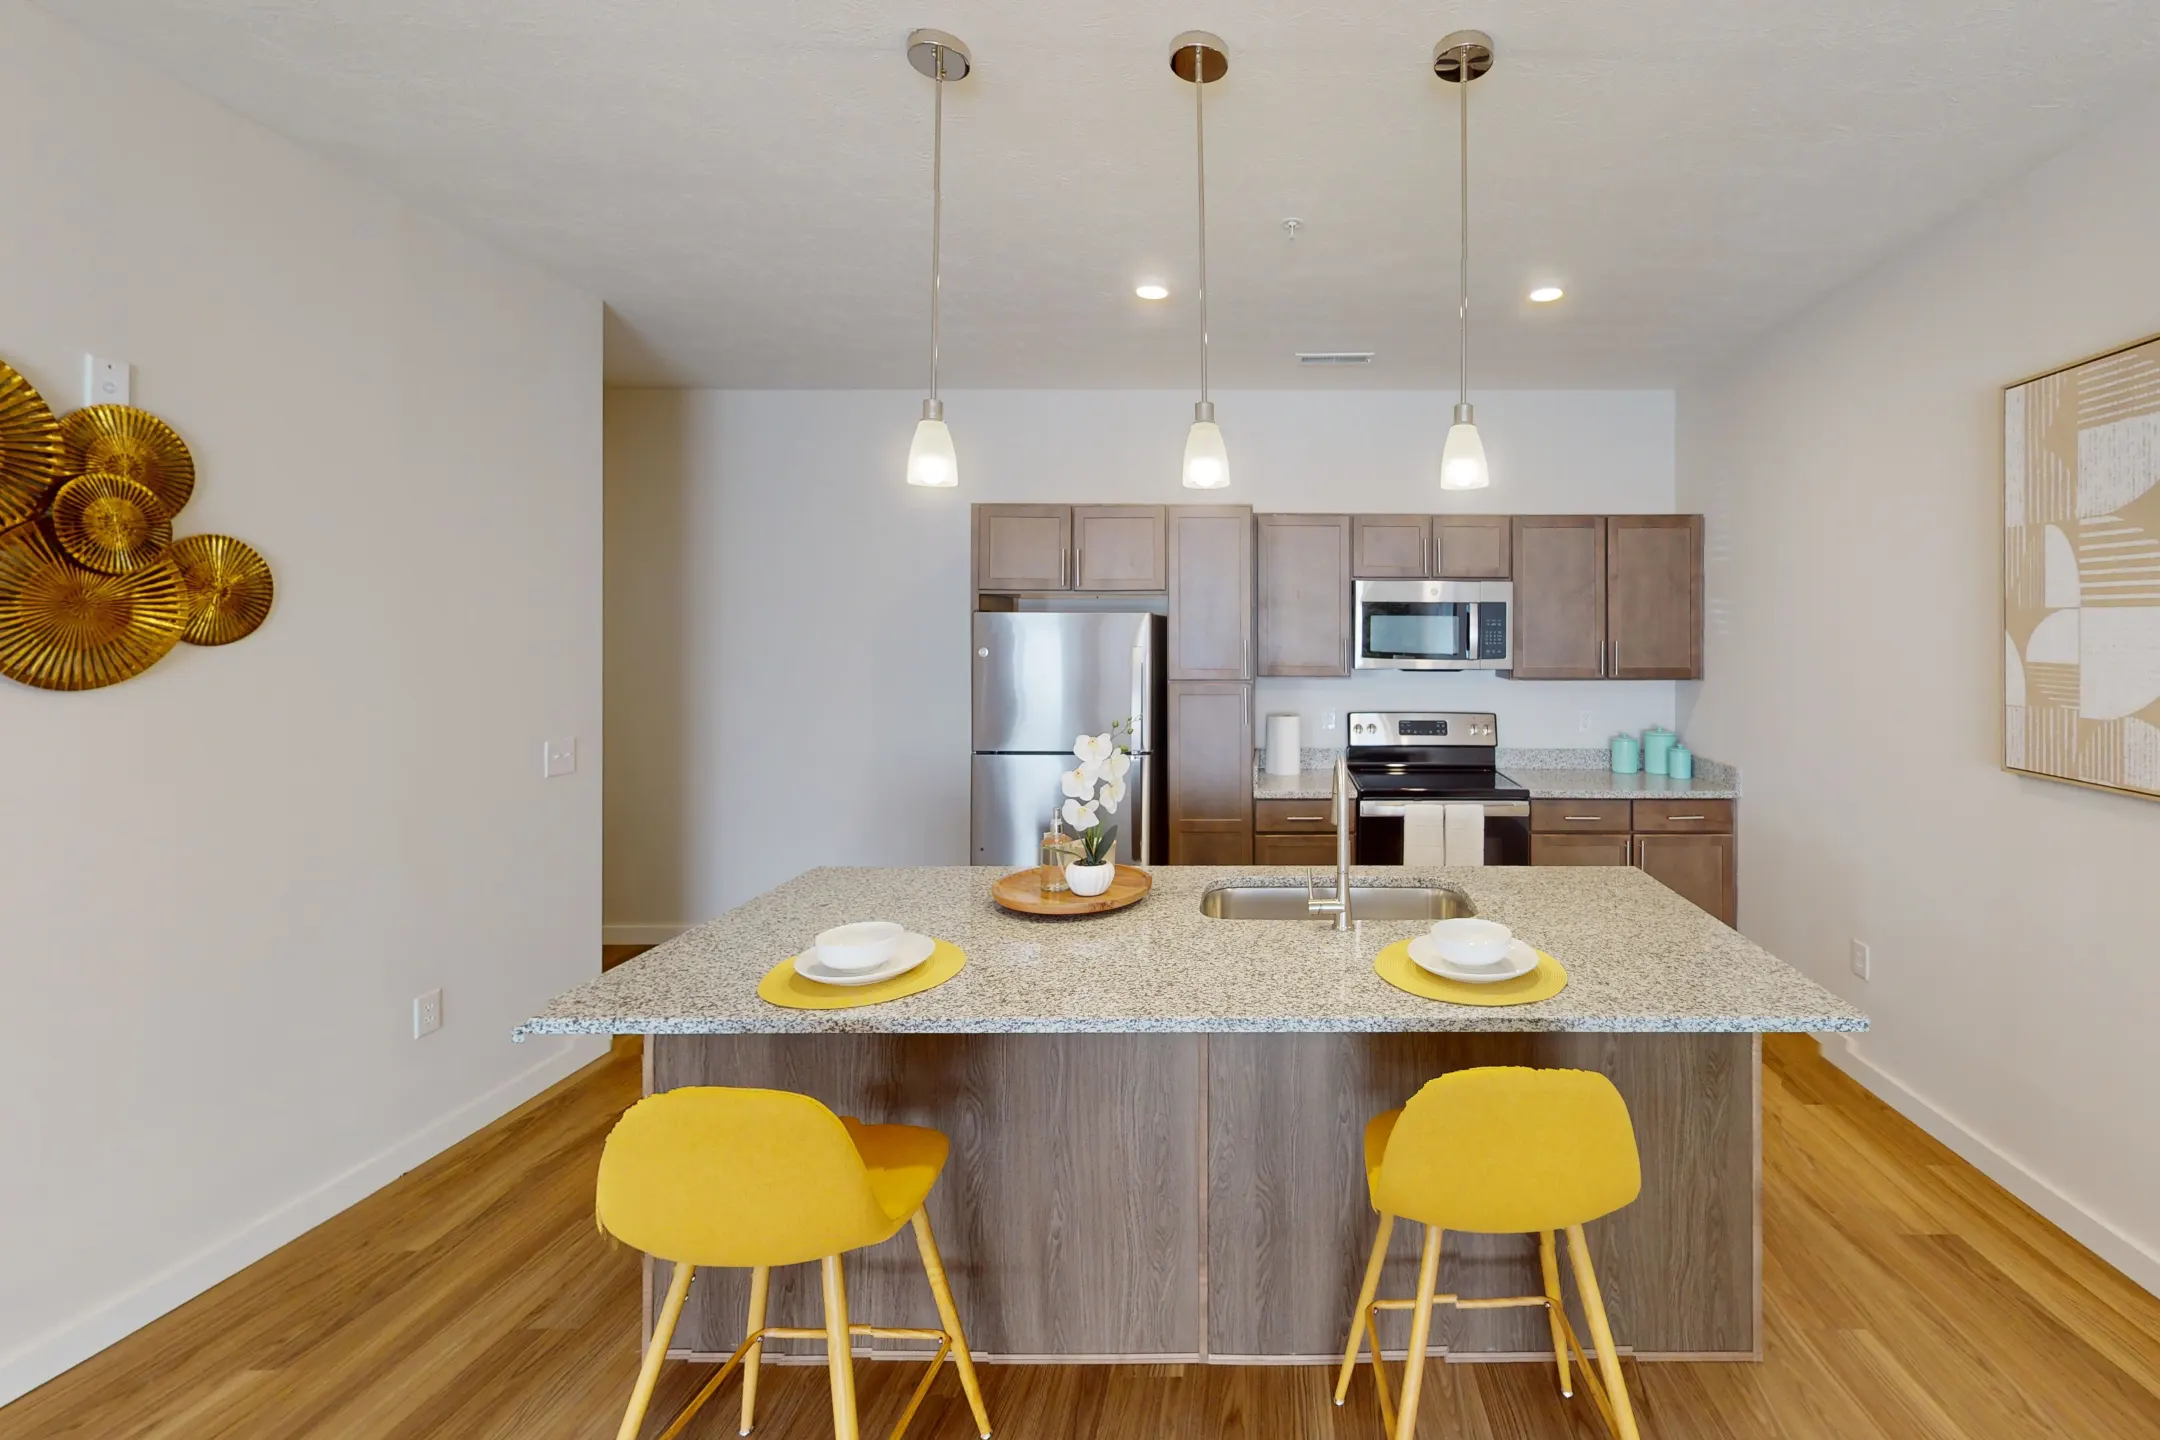 Kitchen - The Landing Apartments - Indianapolis, IN